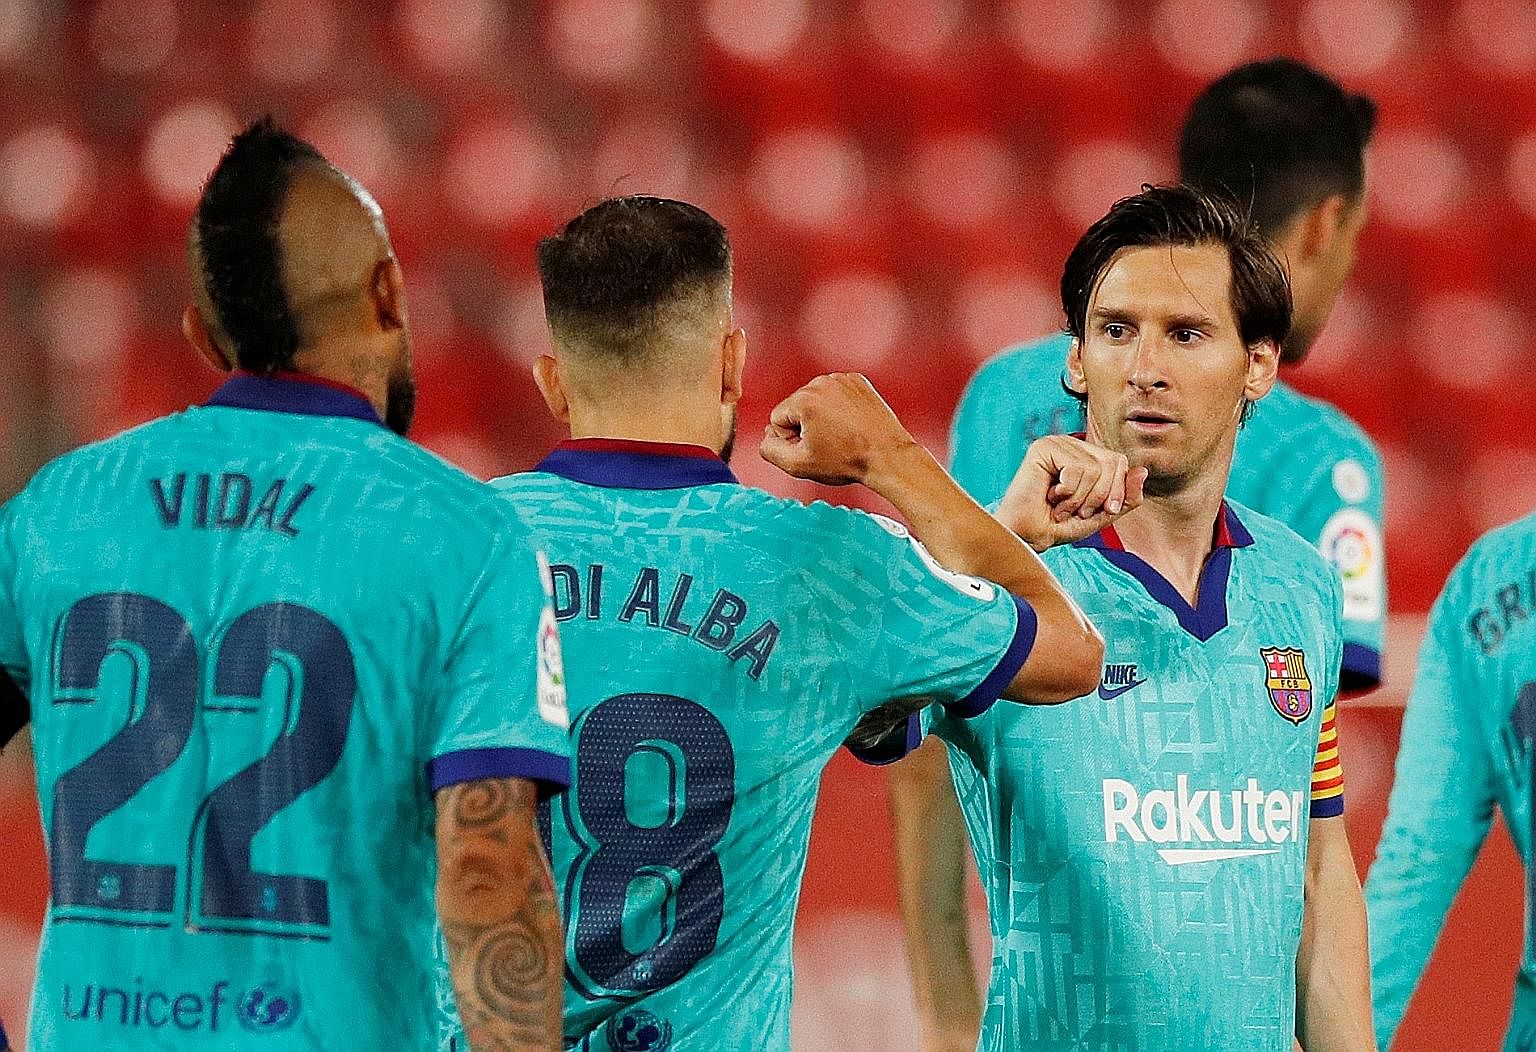 Barcelona's Lionel Messi celebrating their second goal - scored by Martin Braithwaite (not pictured) - with Jordi Alba.